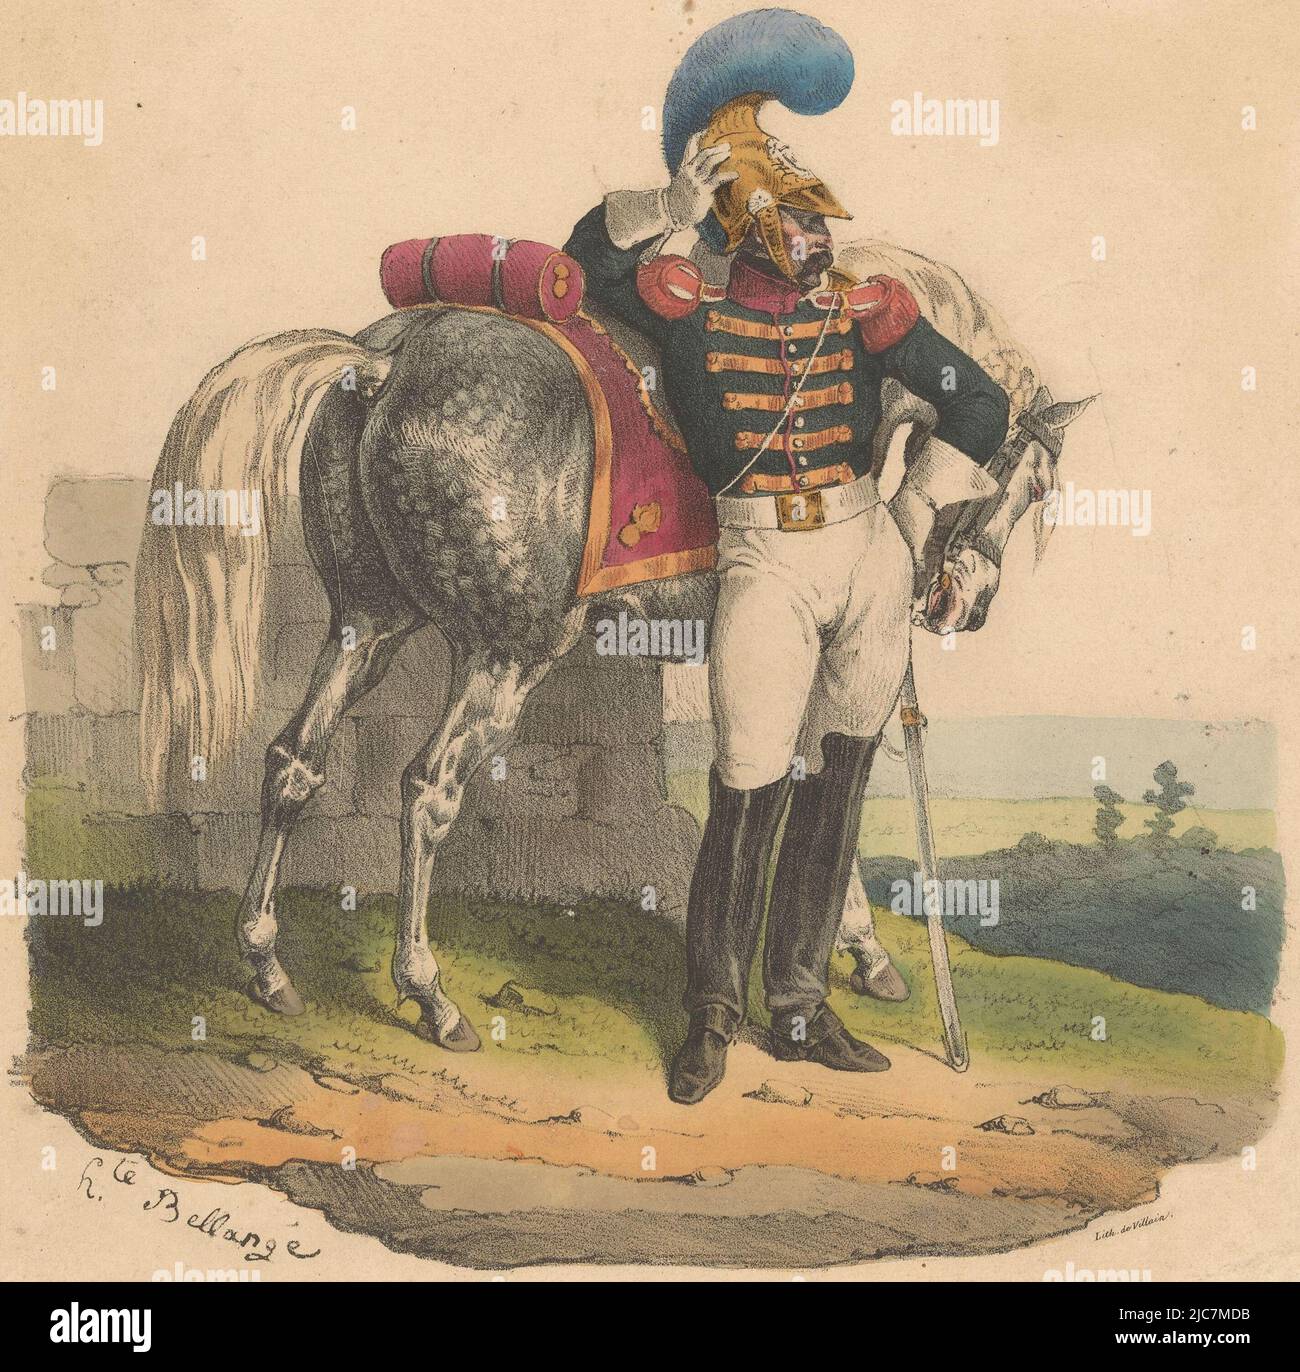 Trumpeter of the carabiniers with horse Trompette des carabiniers , print maker: Hippolyte Bellangé, (mentioned on object), printer: François Jean Villain, (mentioned on object), Paris, 1818 - 1852, paper, h 286 mm × w 249 mm Stock Photo